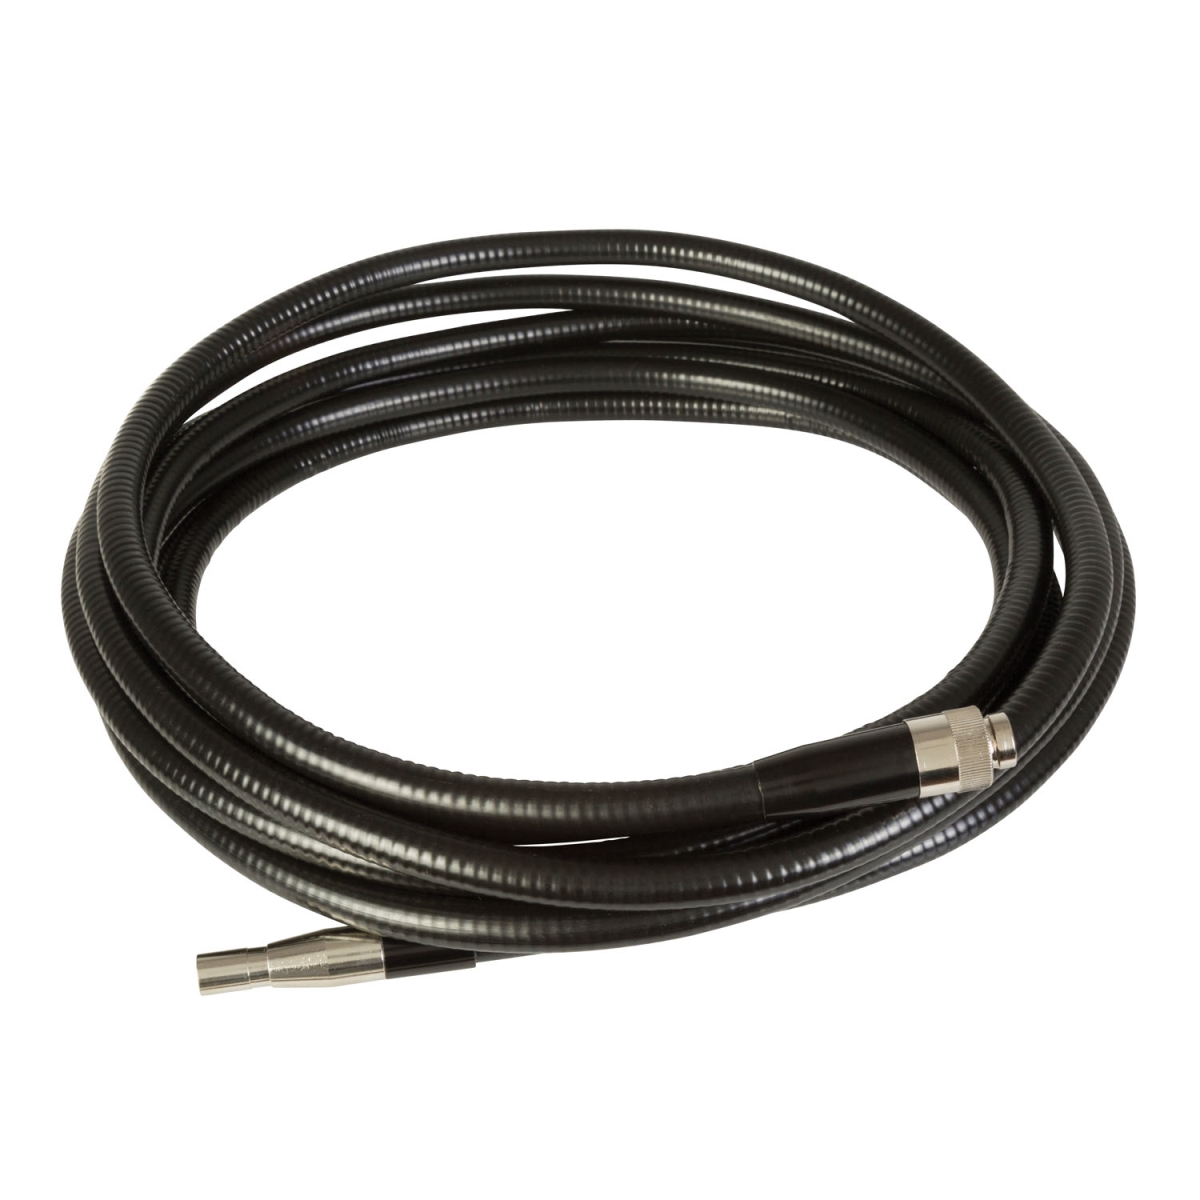 Jsp-79038 16ft Image Cable For Wi-fi